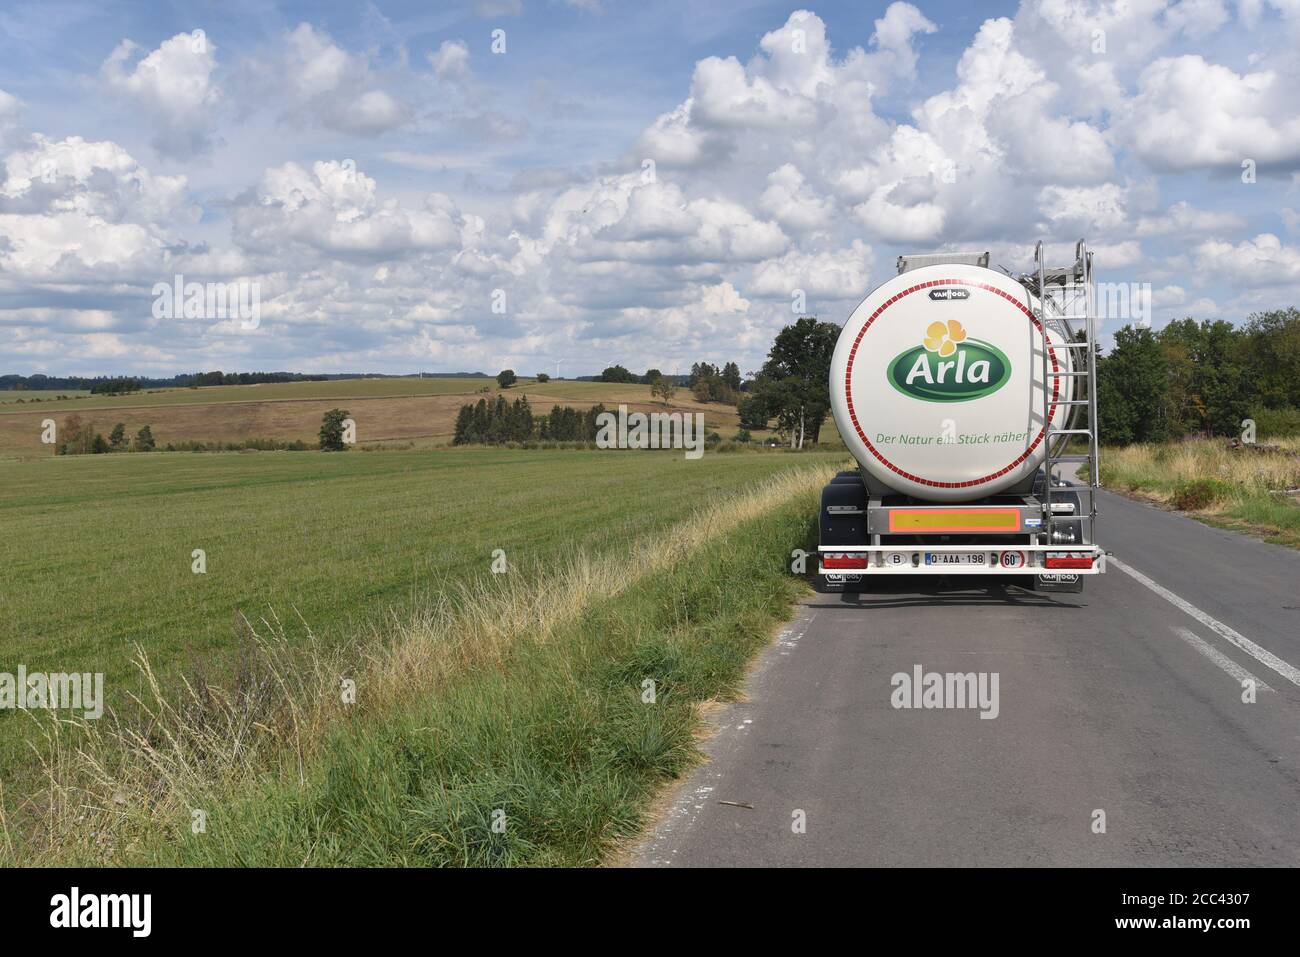 16 August 2020, Belgium, Sankt Vith: A milk transporter from the ARLA dairy  with the advertisement "